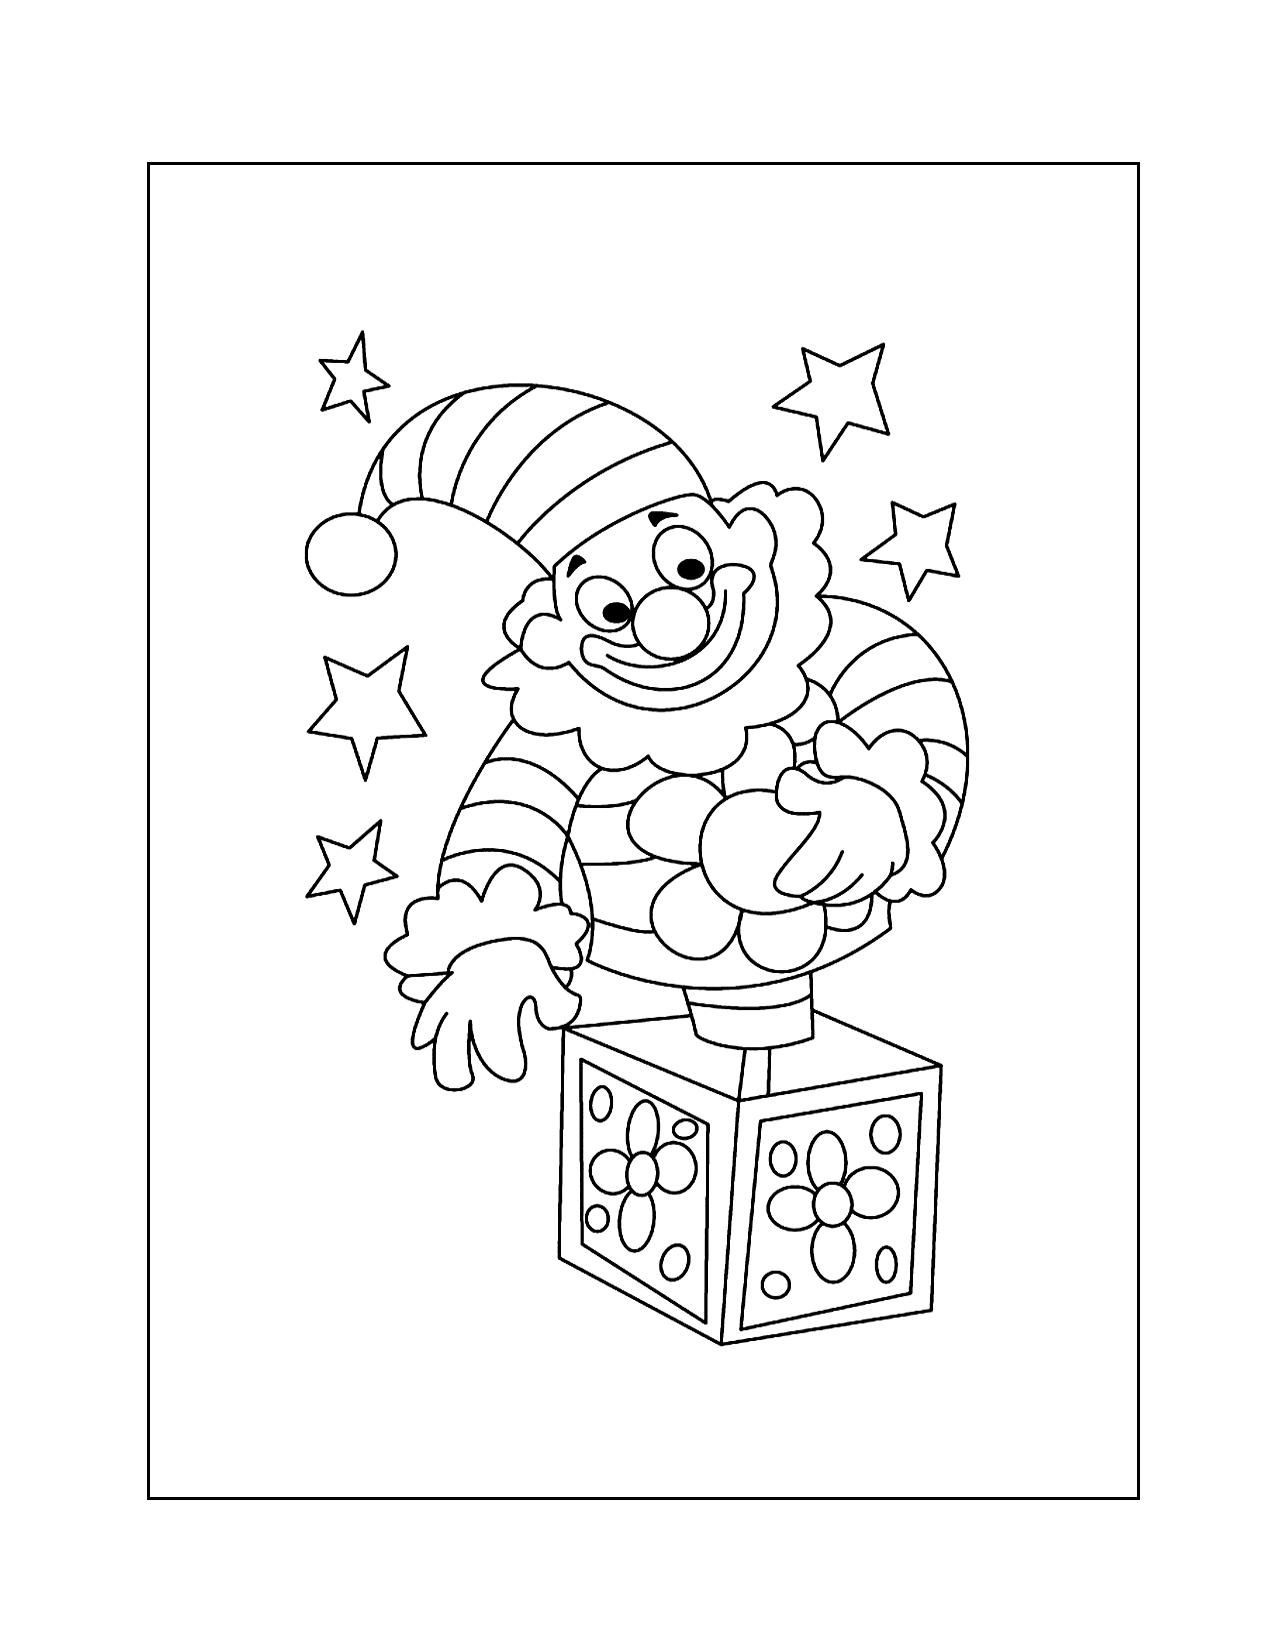 Jack In The Box Coloring Page